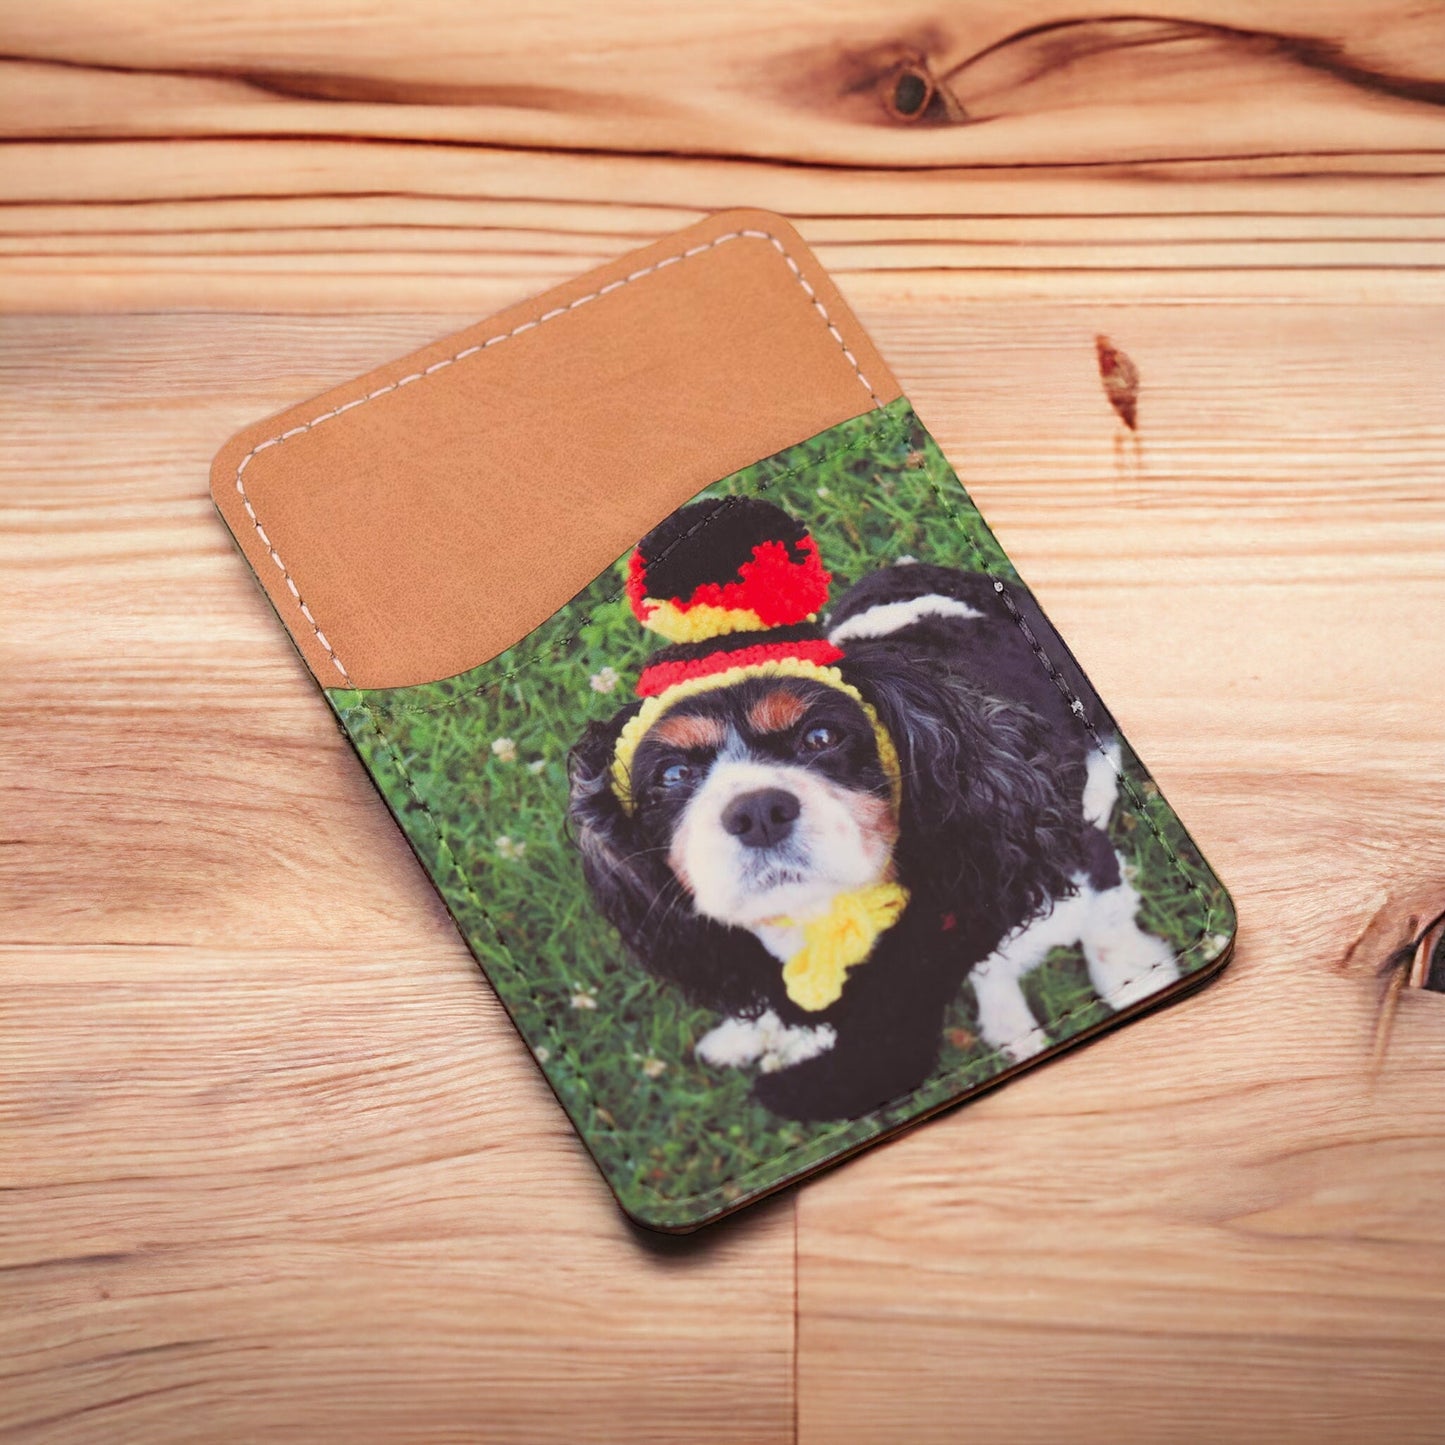 Personalized Dog Photo Phone Wallet - Customized Pet Picture Stick On Card Holder